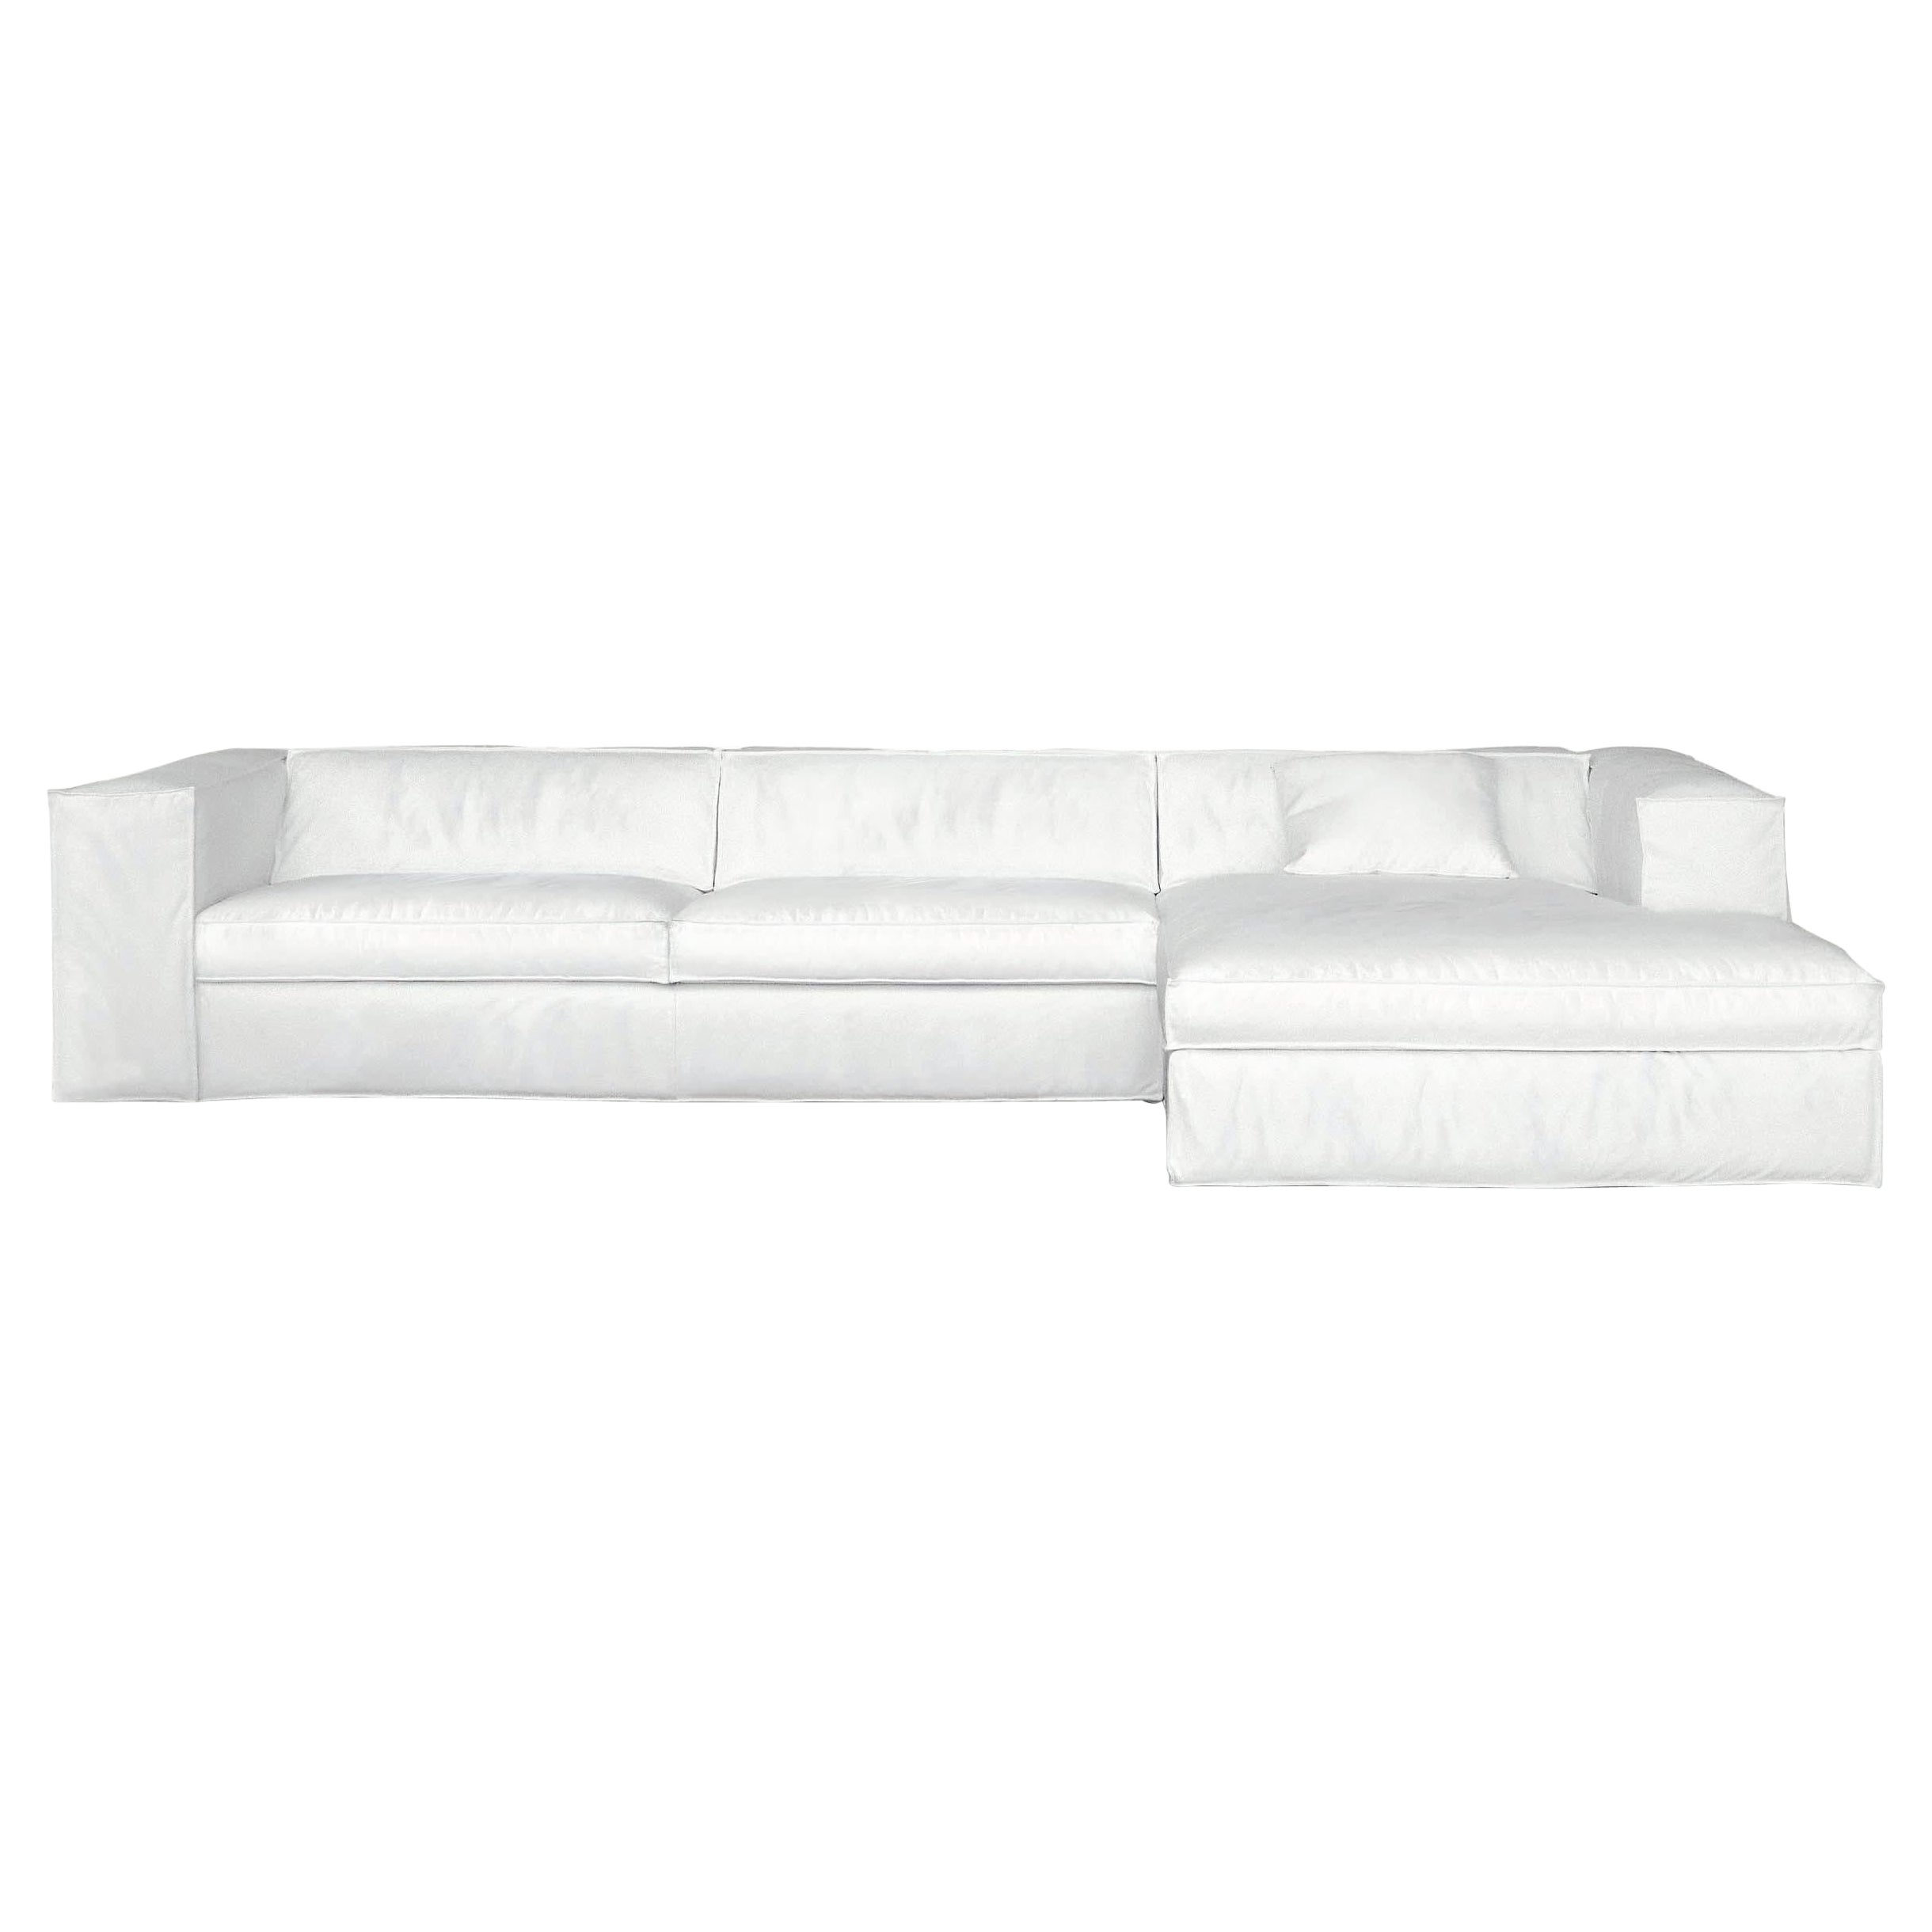 Up Extra Large Modular Sofa in Lusso White Upholstery by Giuseppe Viganò